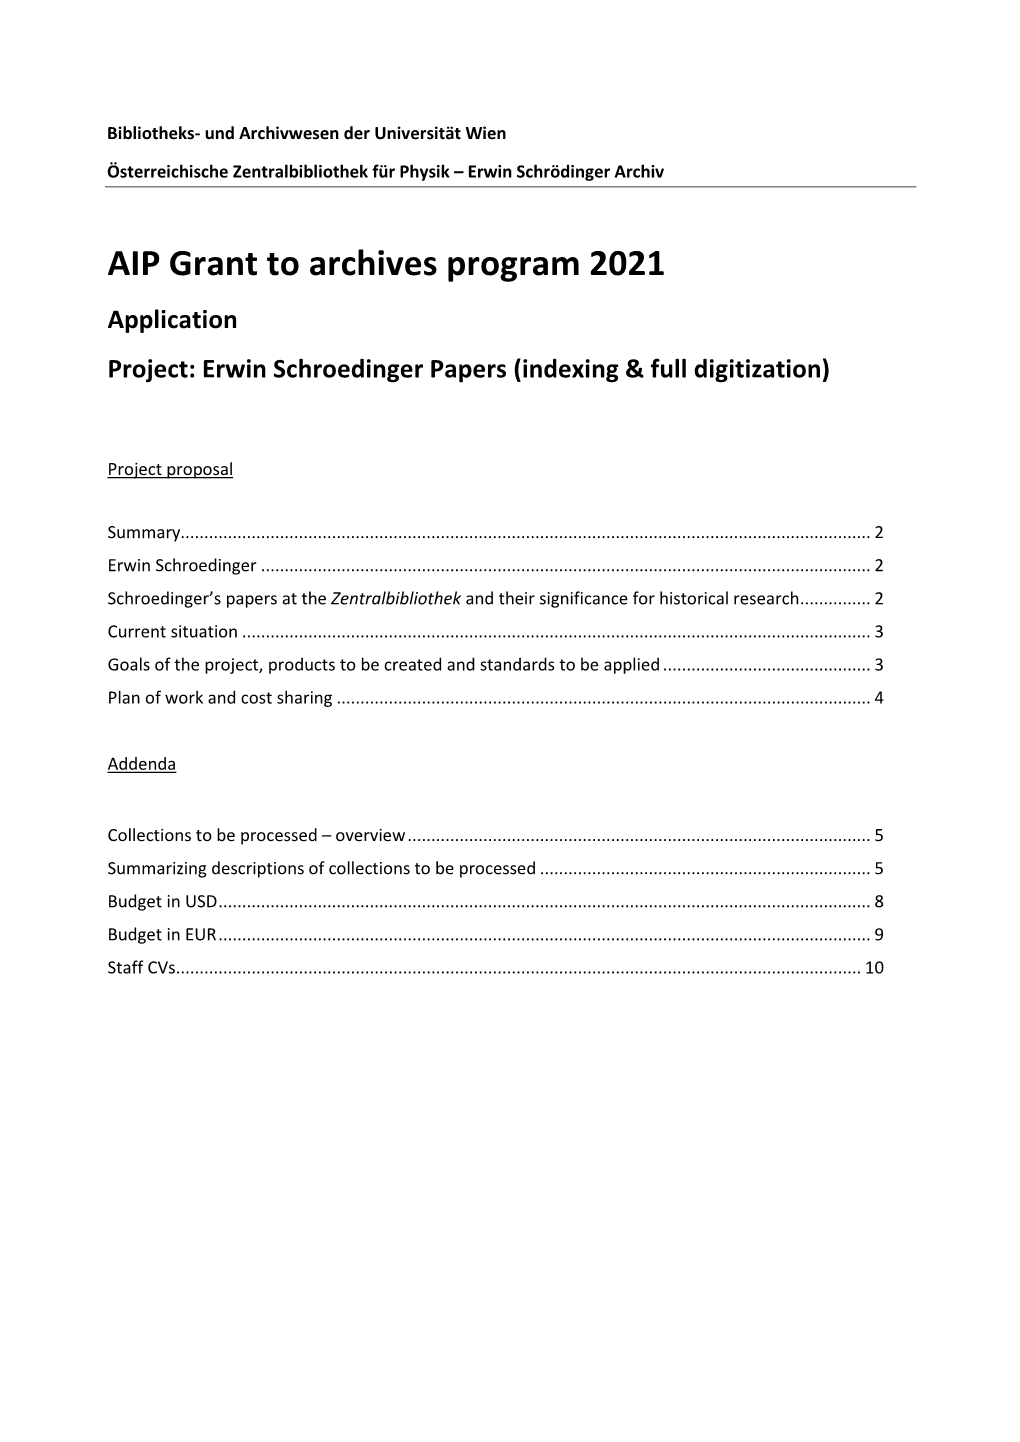 AIP Grant to Archives Program 2021 Application Project: Erwin Schroedinger Papers (Indexing & Full Digitization)